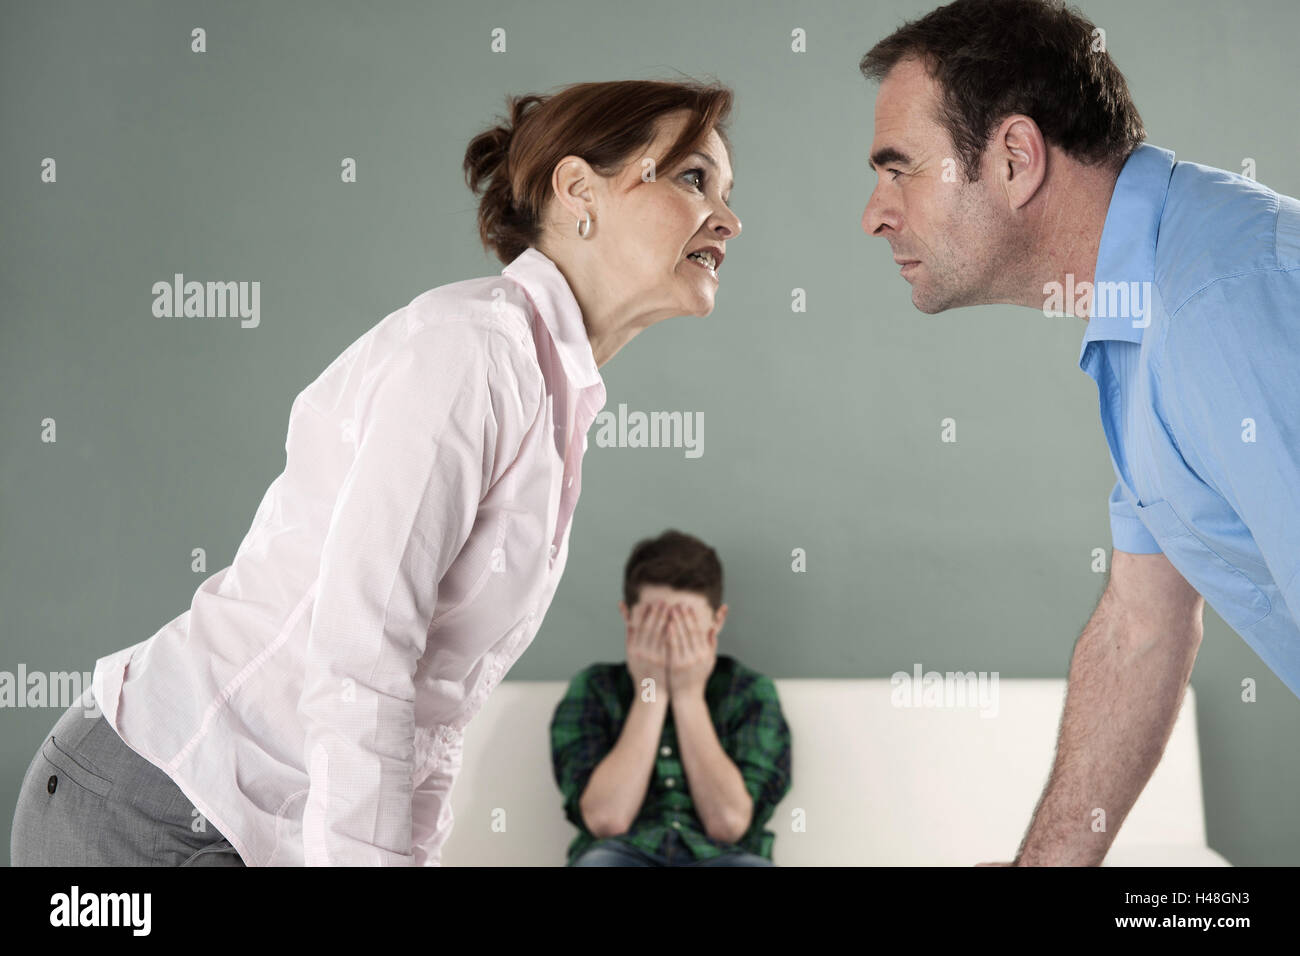 Nut and father argue before her child, Stock Photo